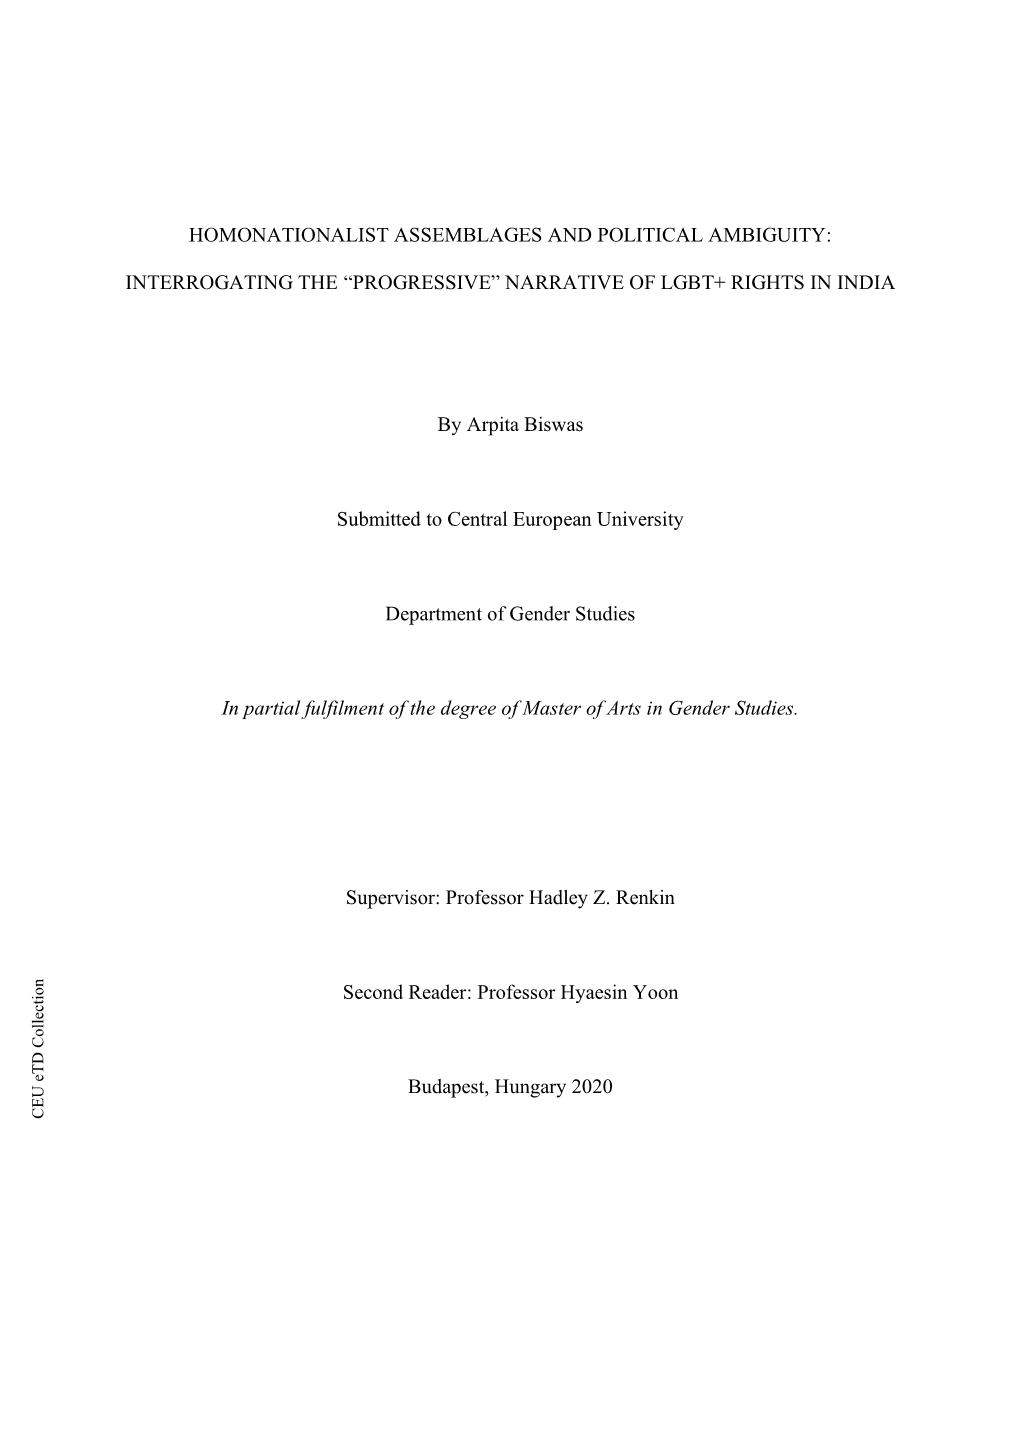 HOMONATIONALIST ASSEMBLAGES and POLITICAL AMBIGUITY: INTERROGATING the “PROGRESSIVE” NARRATIVE of LGBT+ RIGHTS in INDIA By